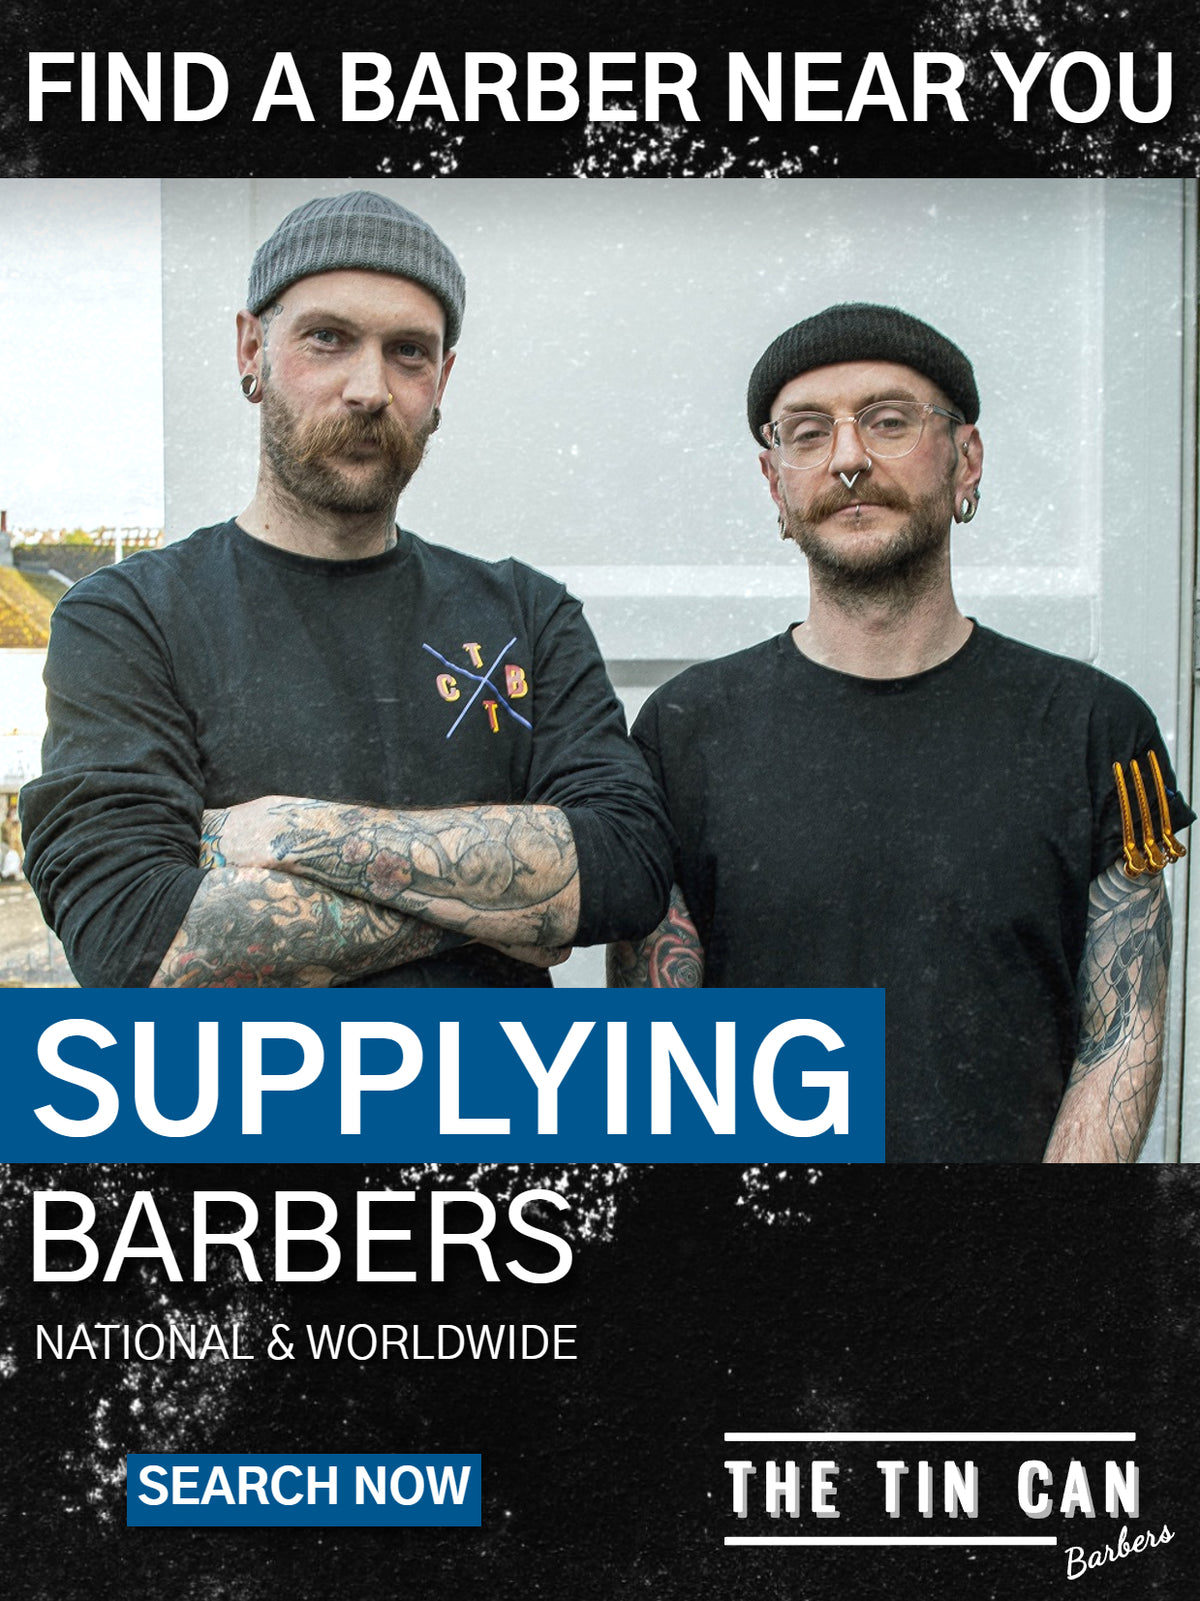 One society, stocking barbers across the UK and the rest of the world. Onesociety men's grooming Products. Great British barber bash. Salon international. Barber Connect.